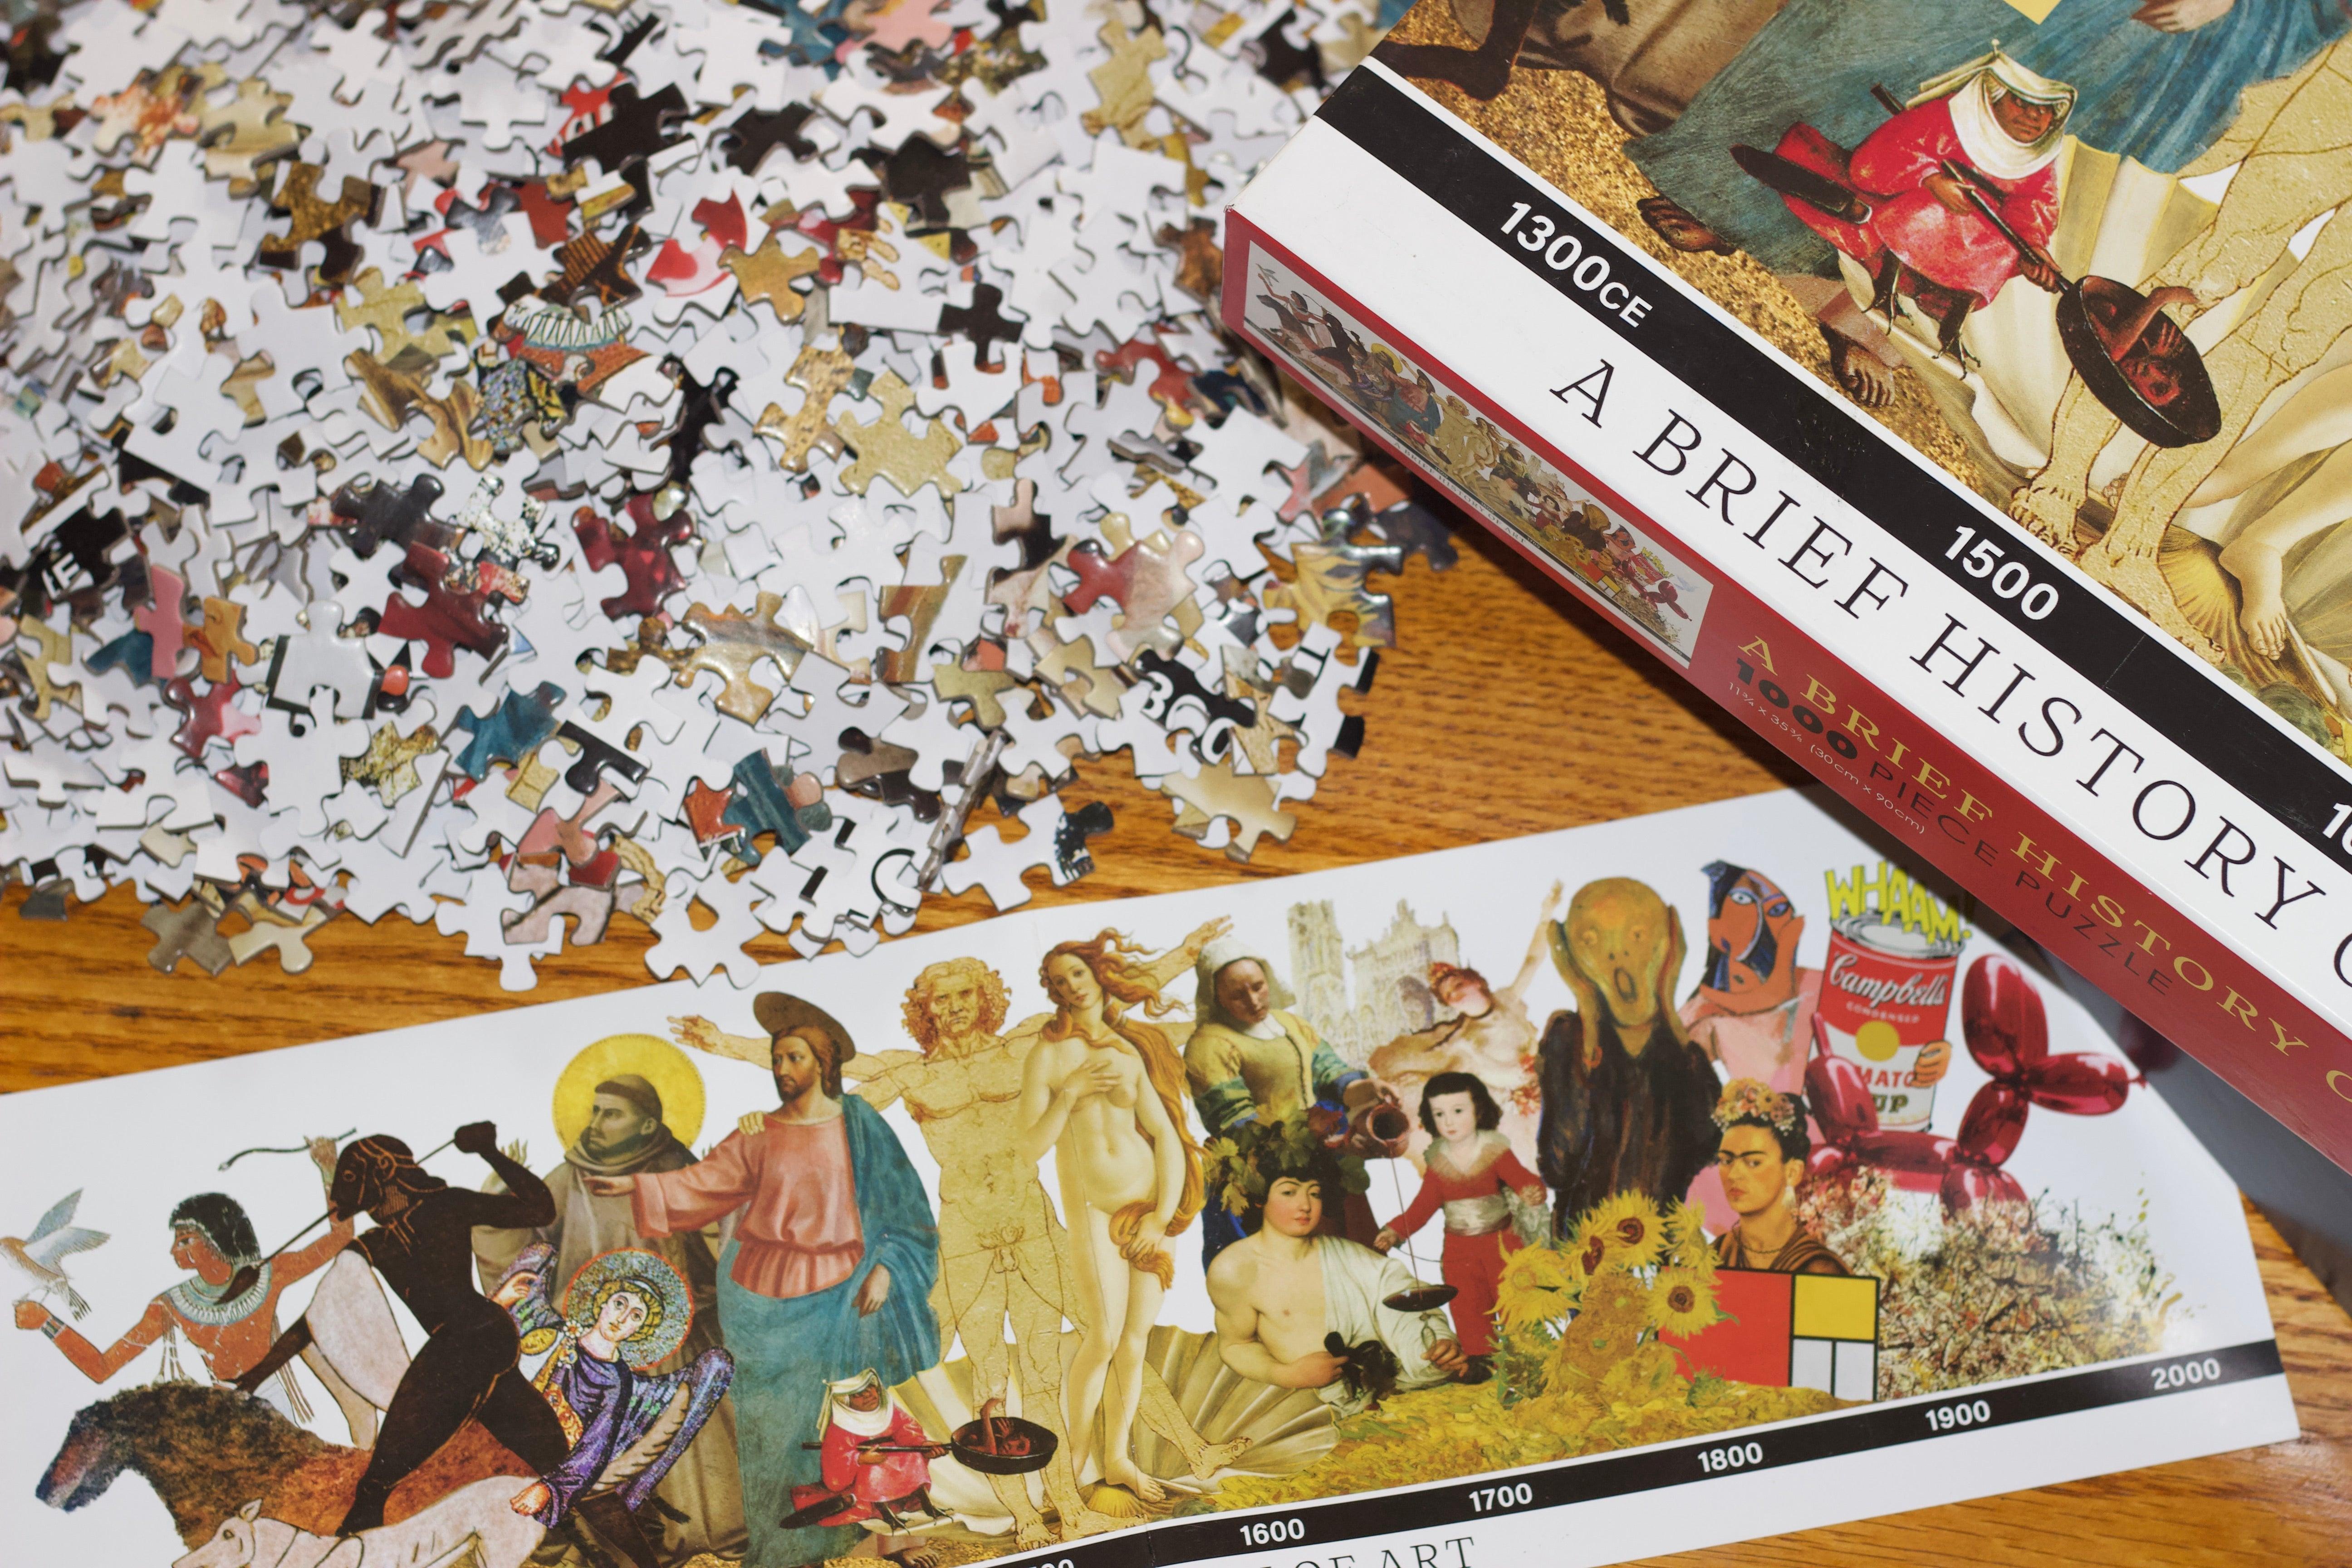 5000 Piece Puzzles – The Puzzle Collections